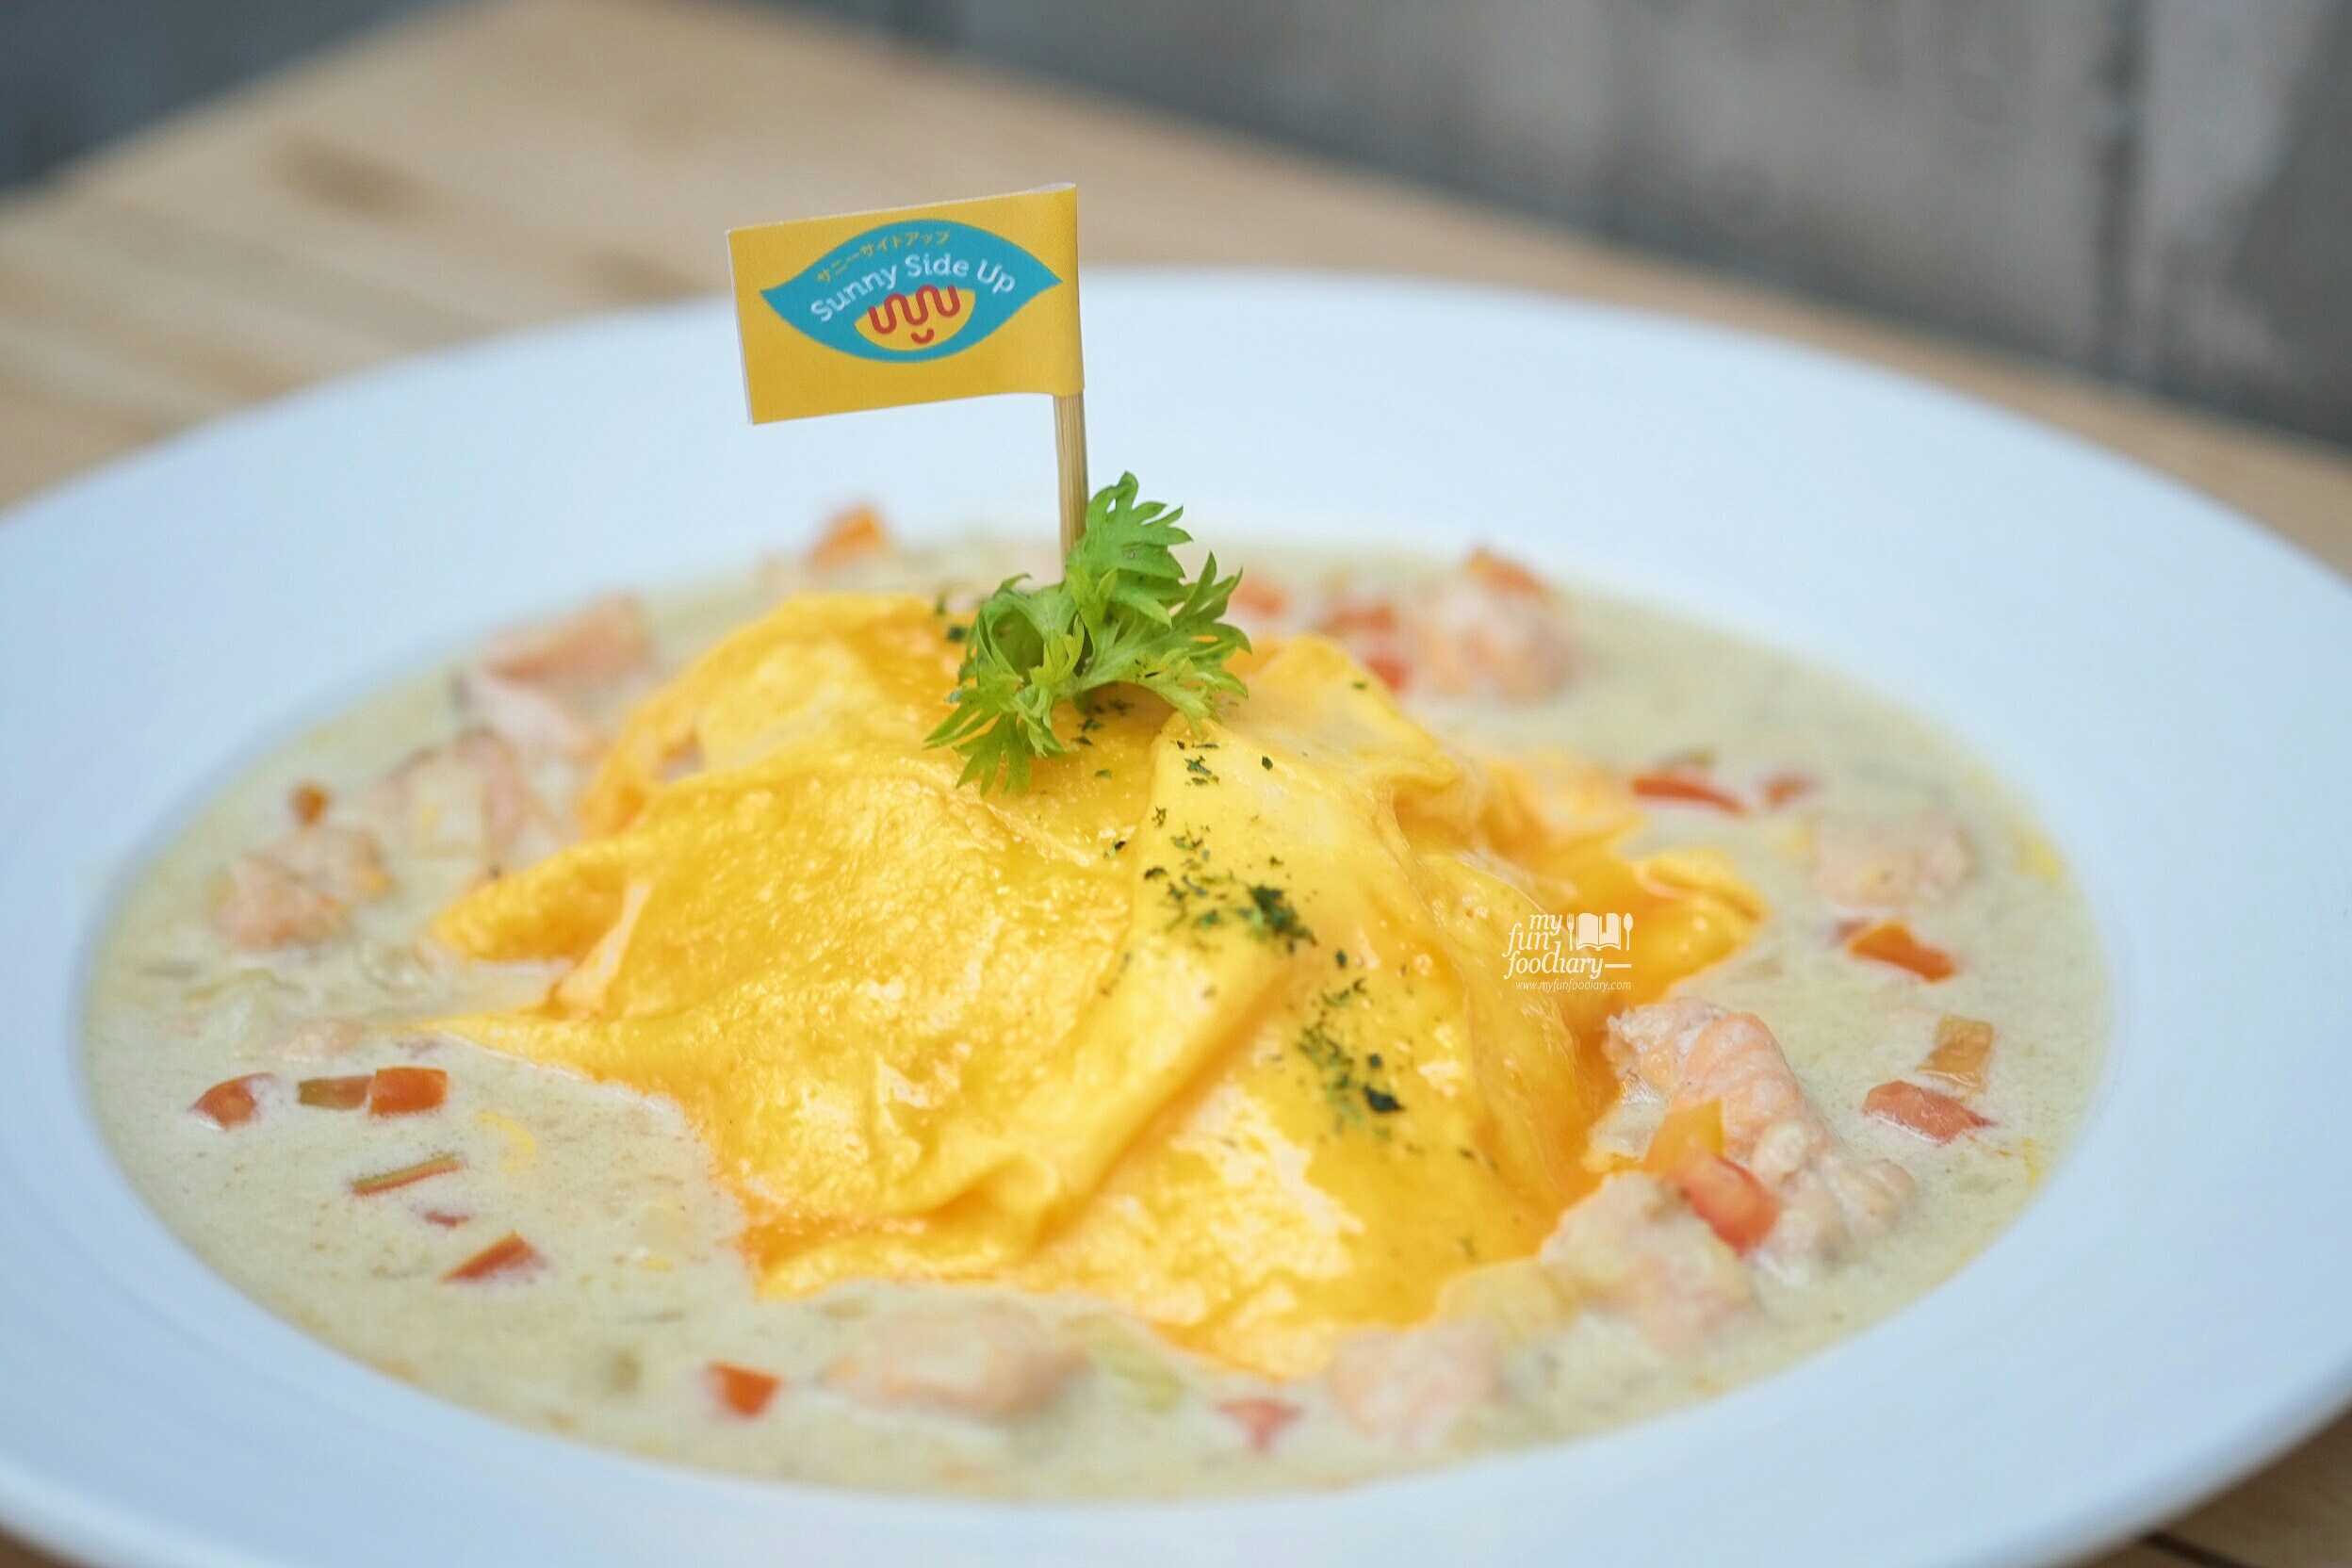 Creamy Salmon Omurice at Sunny Side Up by Myfunfoodiary